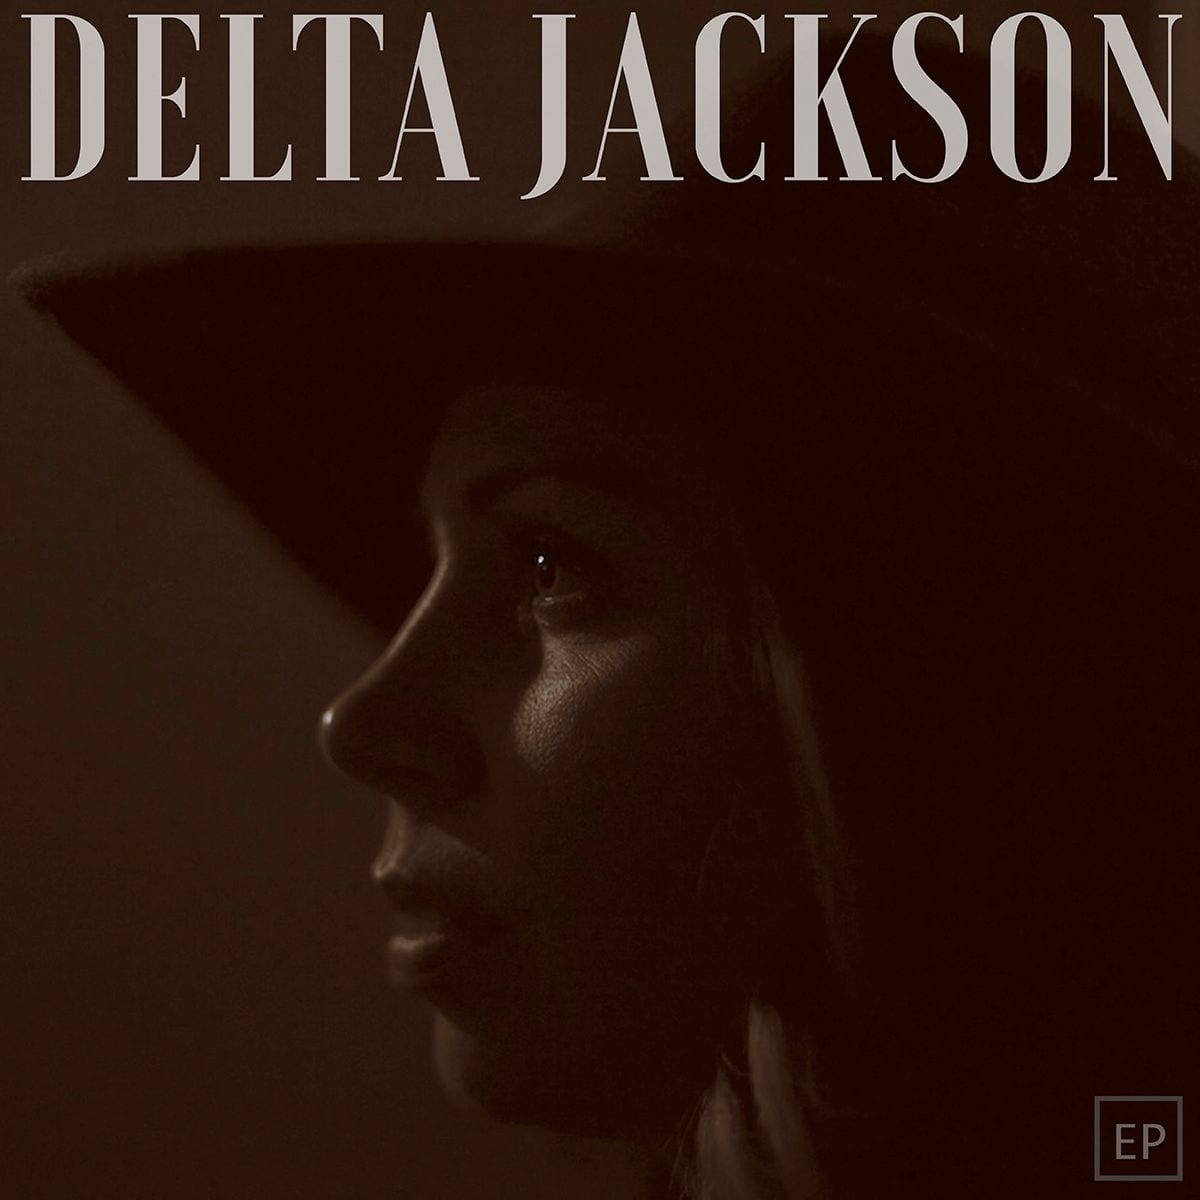 Delta Jackson Returns to Her Roots on New EP (album premiere)